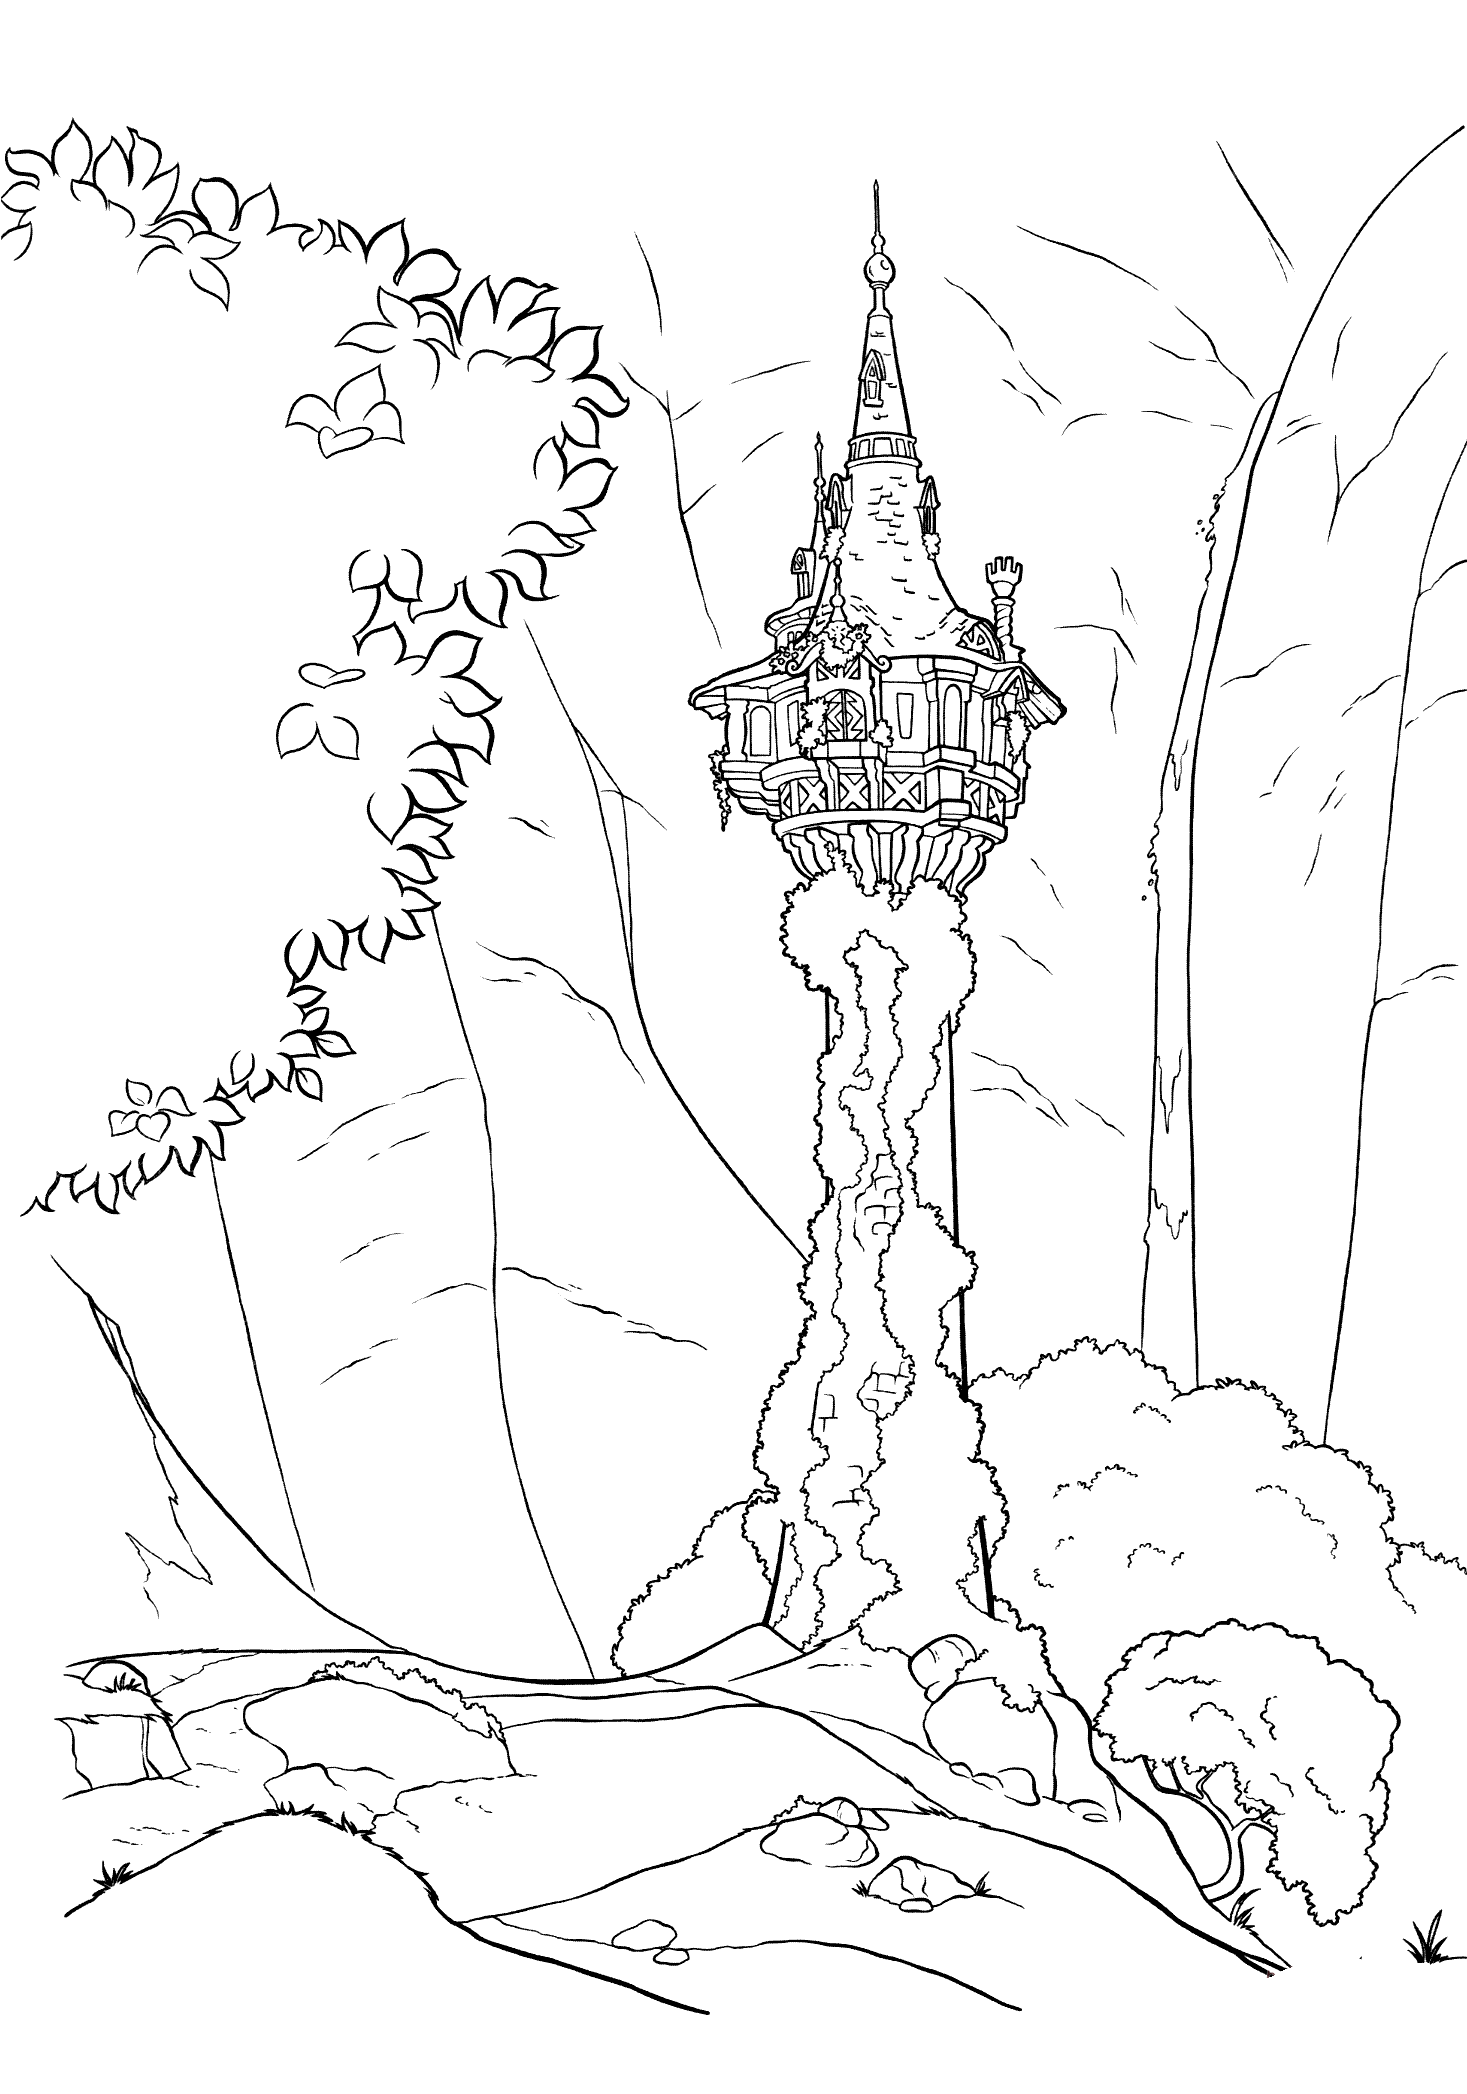 The tower of Rapunzel from Rapunzel